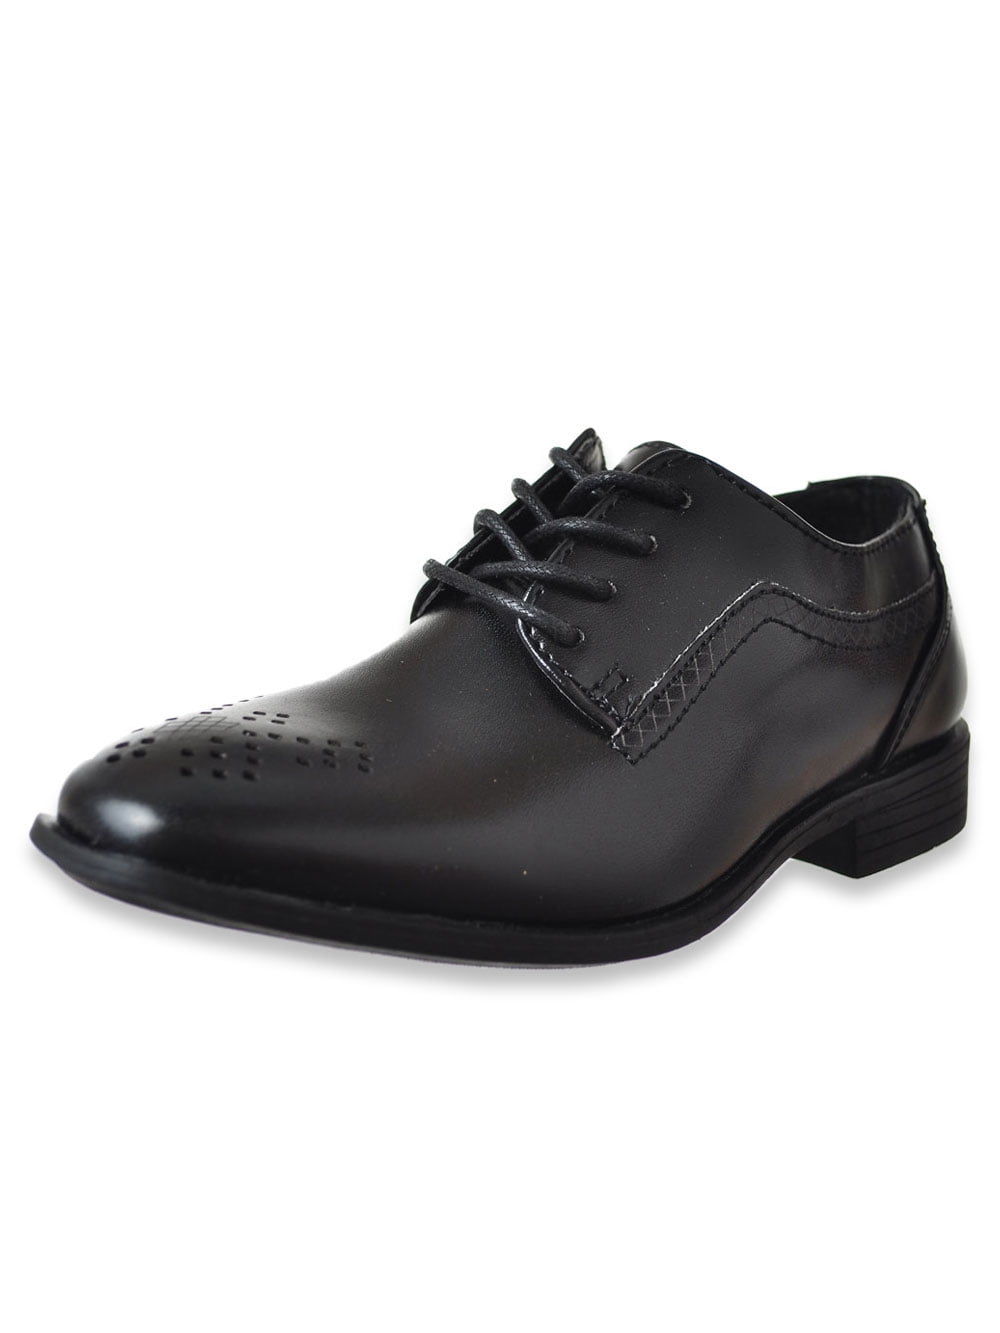 Collection Boys' Dress Shoes - Walmart 